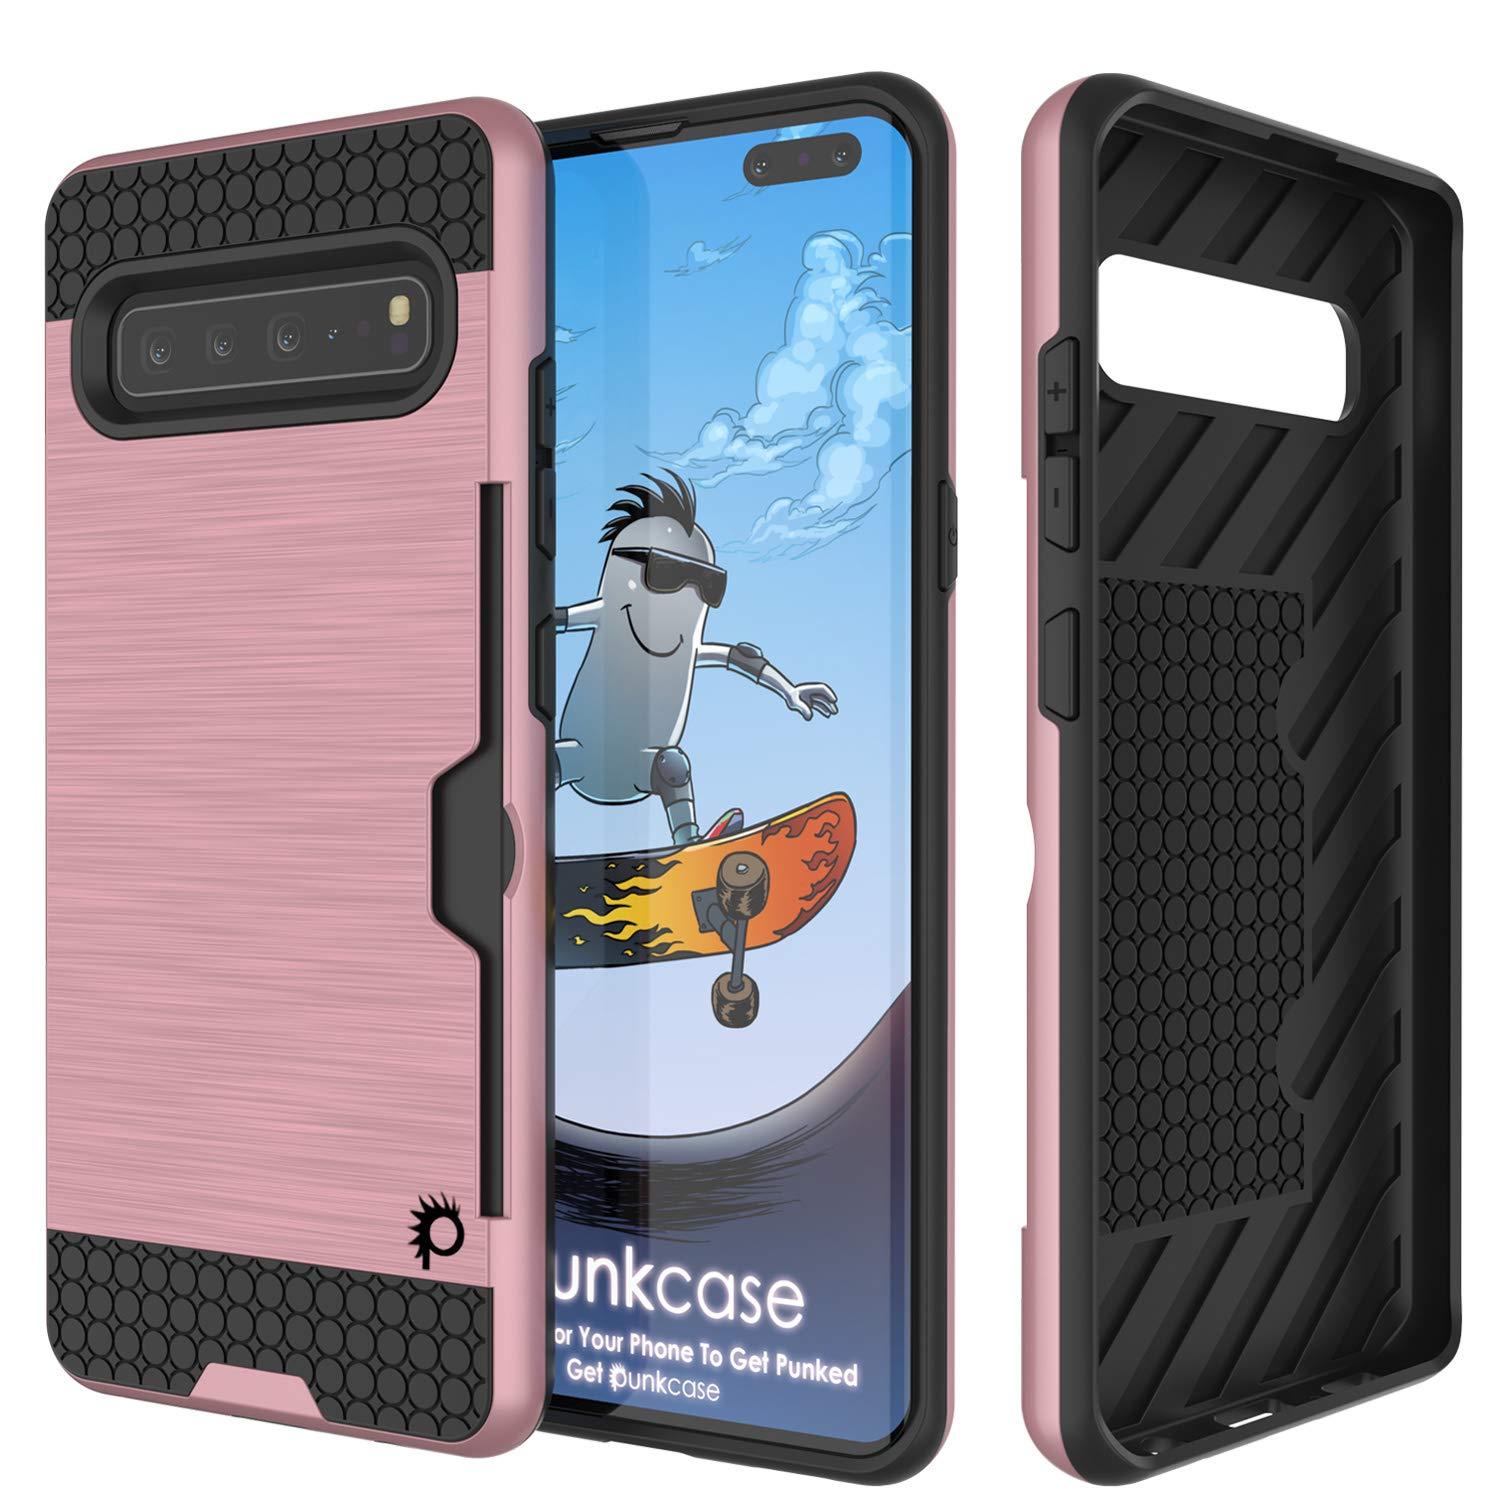 Galaxy S10 5G  Case, PUNKcase [SLOT Series] [Slim Fit] Dual-Layer Armor Cover w/Integrated Anti-Shock System, Credit Card Slot [Rose Gold]